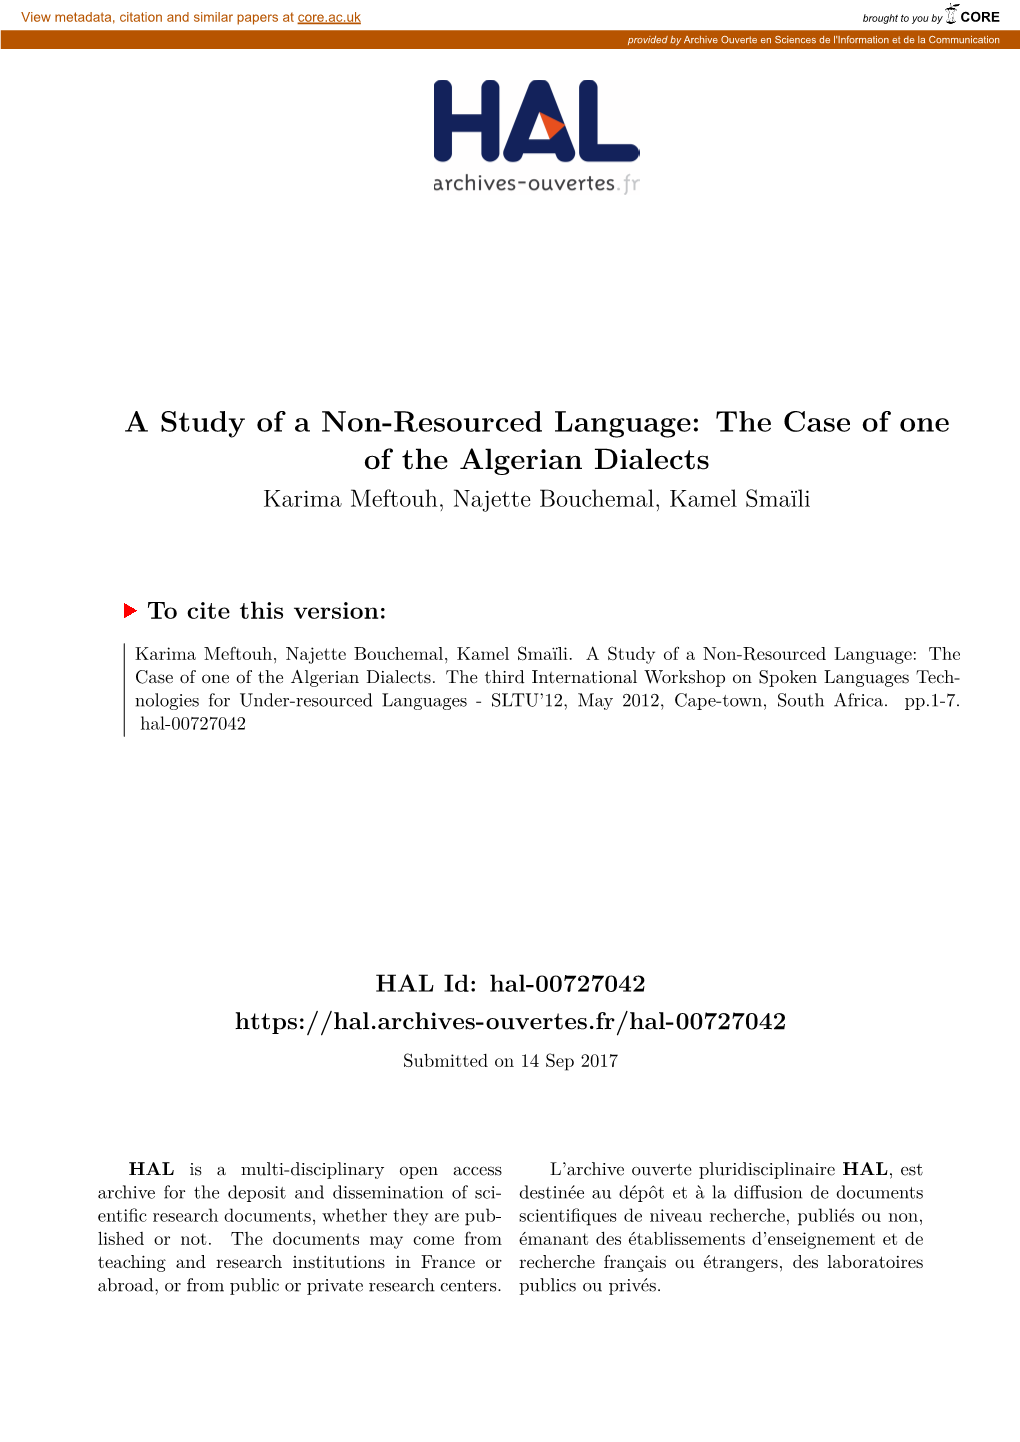 A Study of a Non-Resourced Language: the Case of One of the Algerian Dialects Karima Meftouh, Najette Bouchemal, Kamel Smaïli